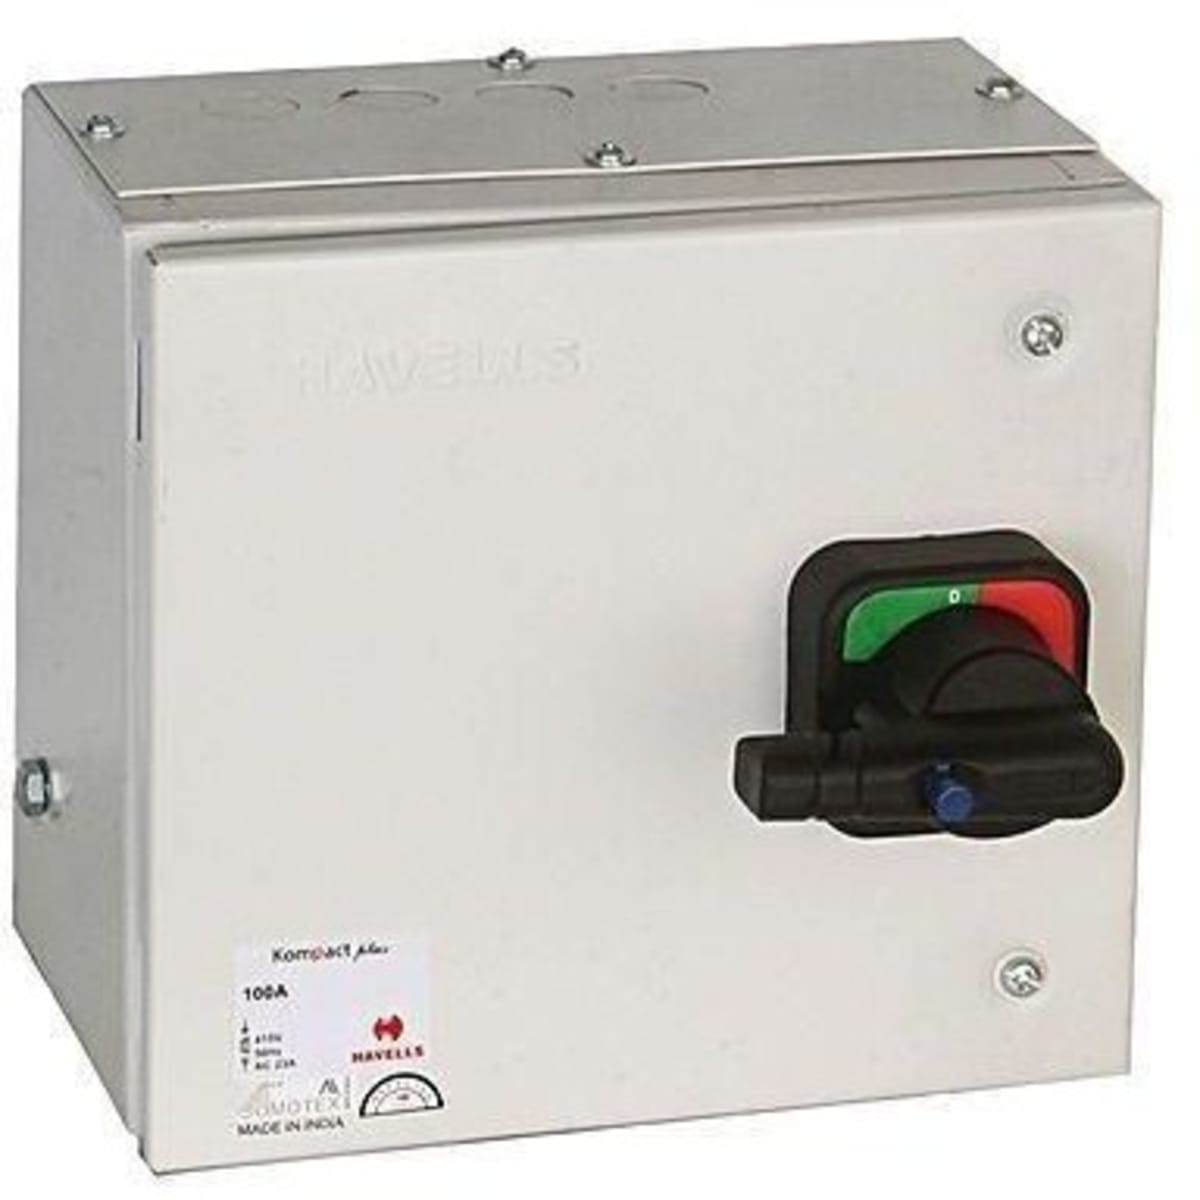 Powertec 4-Pole Gear Changeover Switch - Reliable Power Management at Supply Master Power Management & Protection Buy Tools hardware Building materials